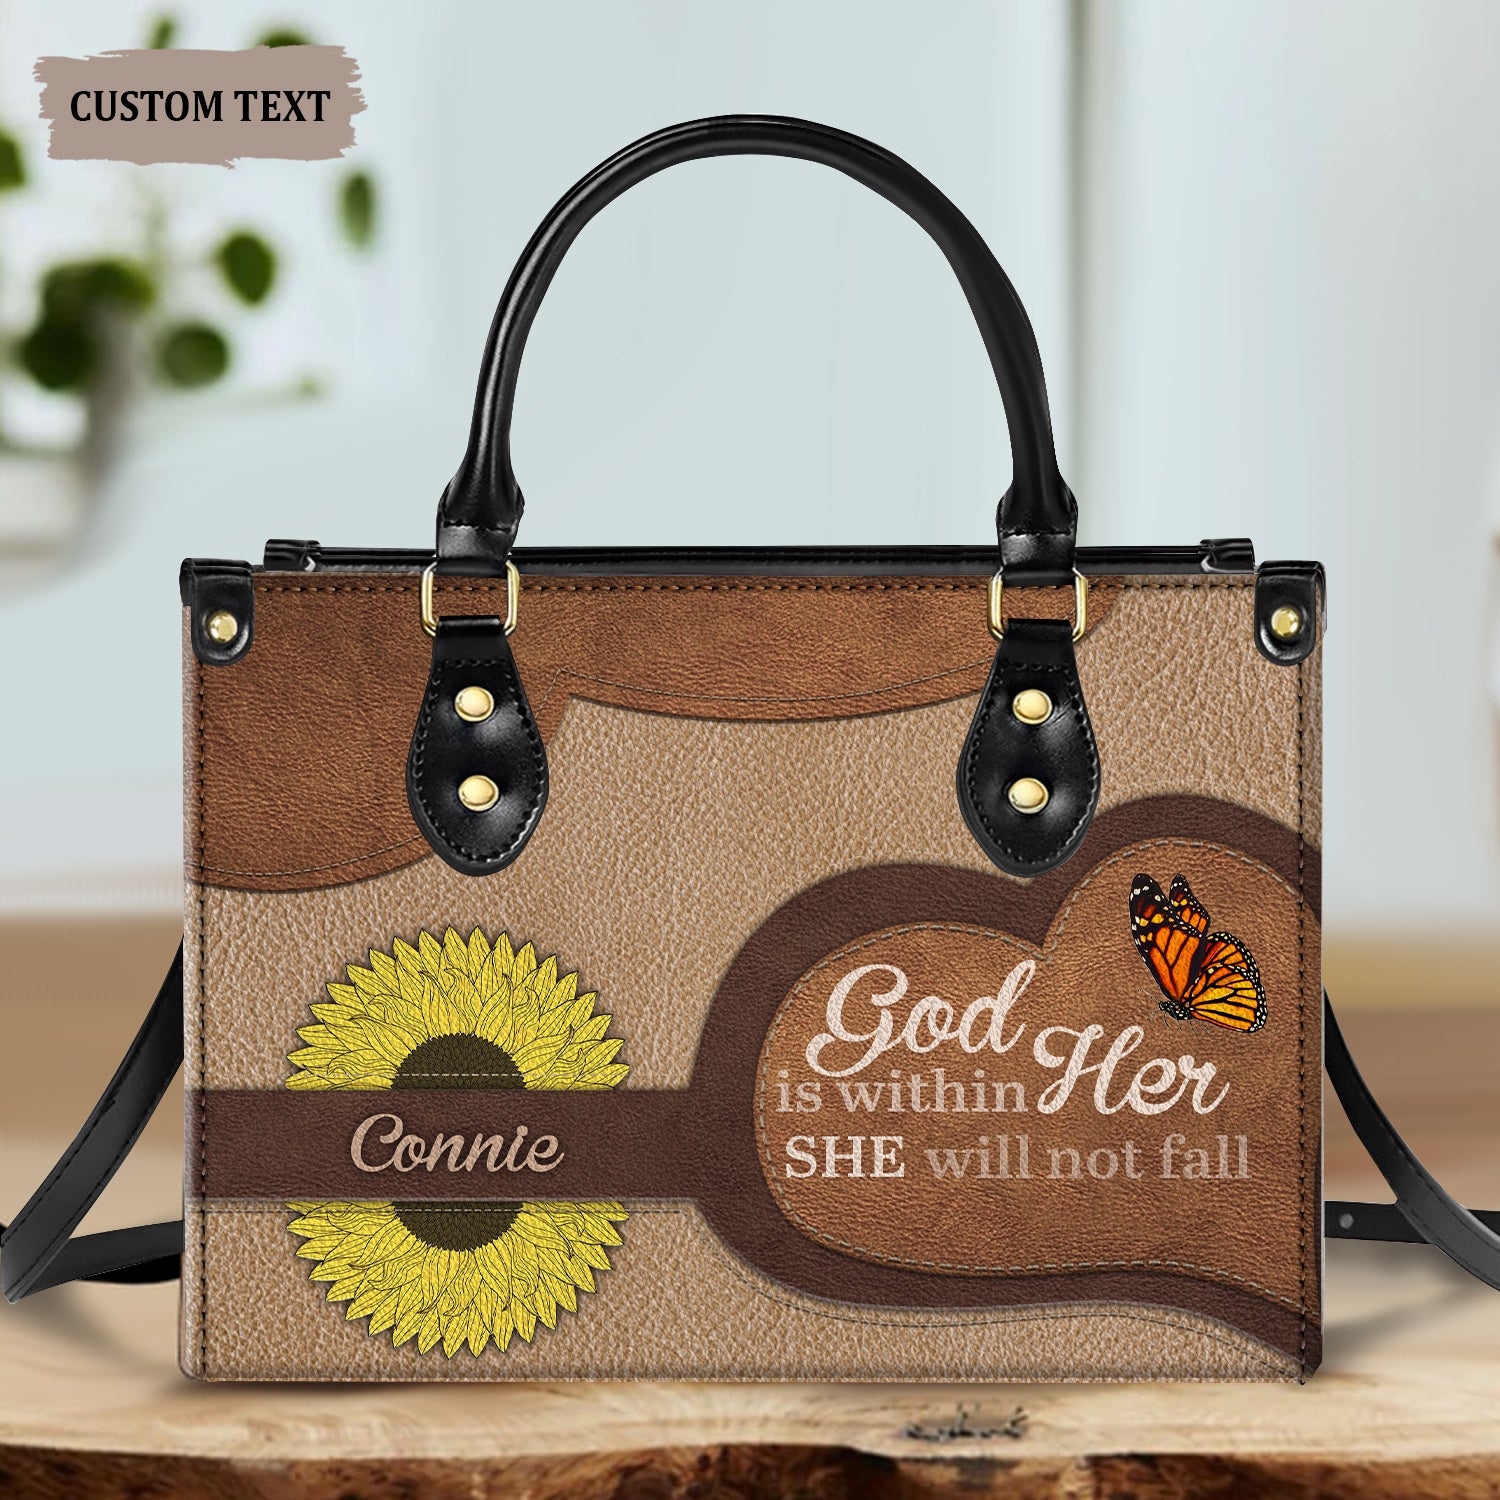 God Is Within Her She Is Not Fall Christian Gift Inspirational Religious Gift Personalized Leather Handbag